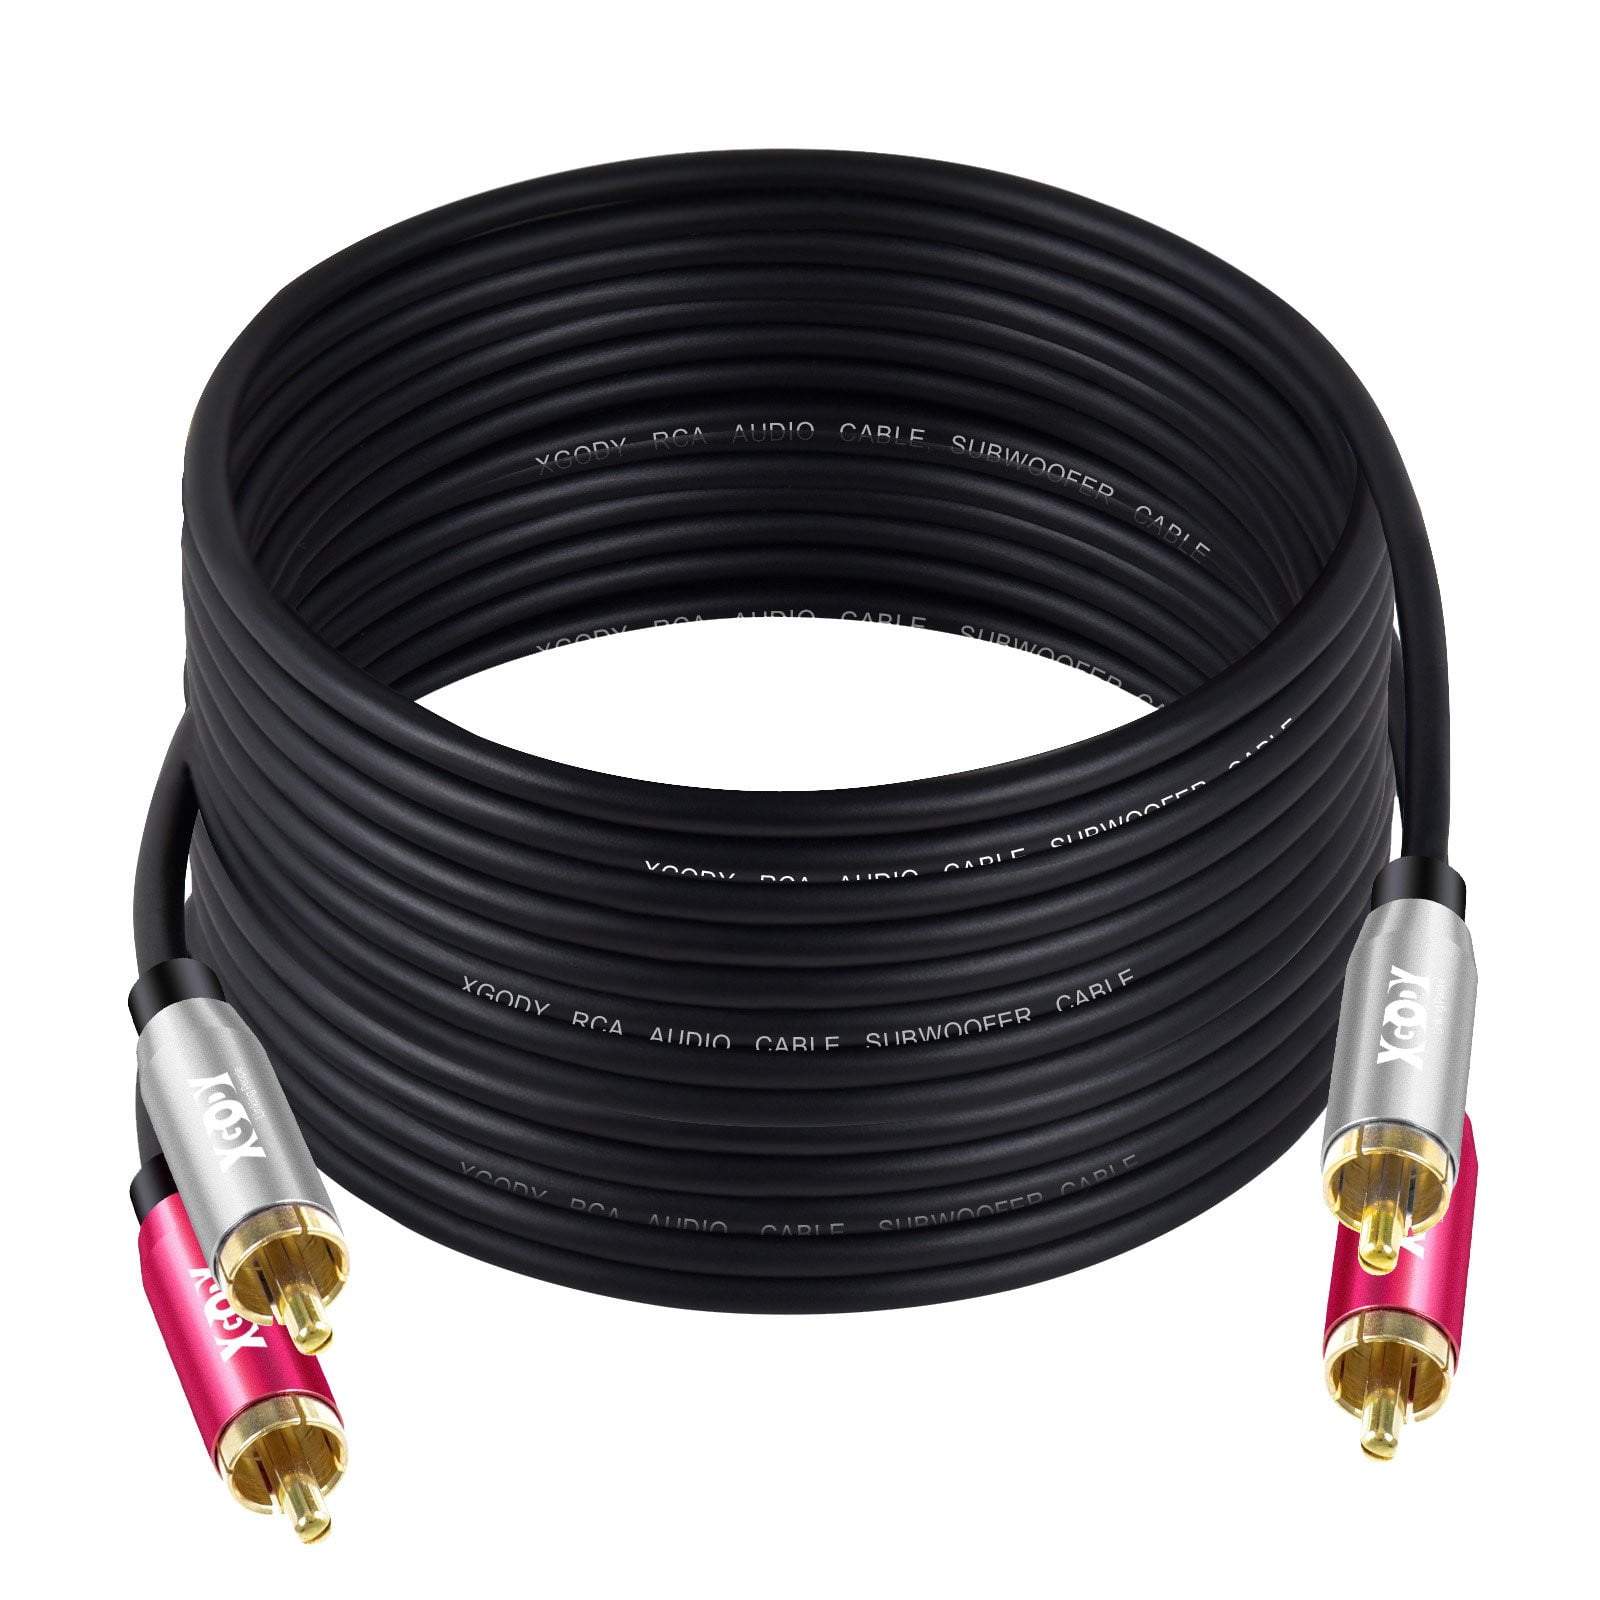 Cost-effective and Most worthwhile RCA Cable 1.2m/2.4m/4.6m long - XGODY 